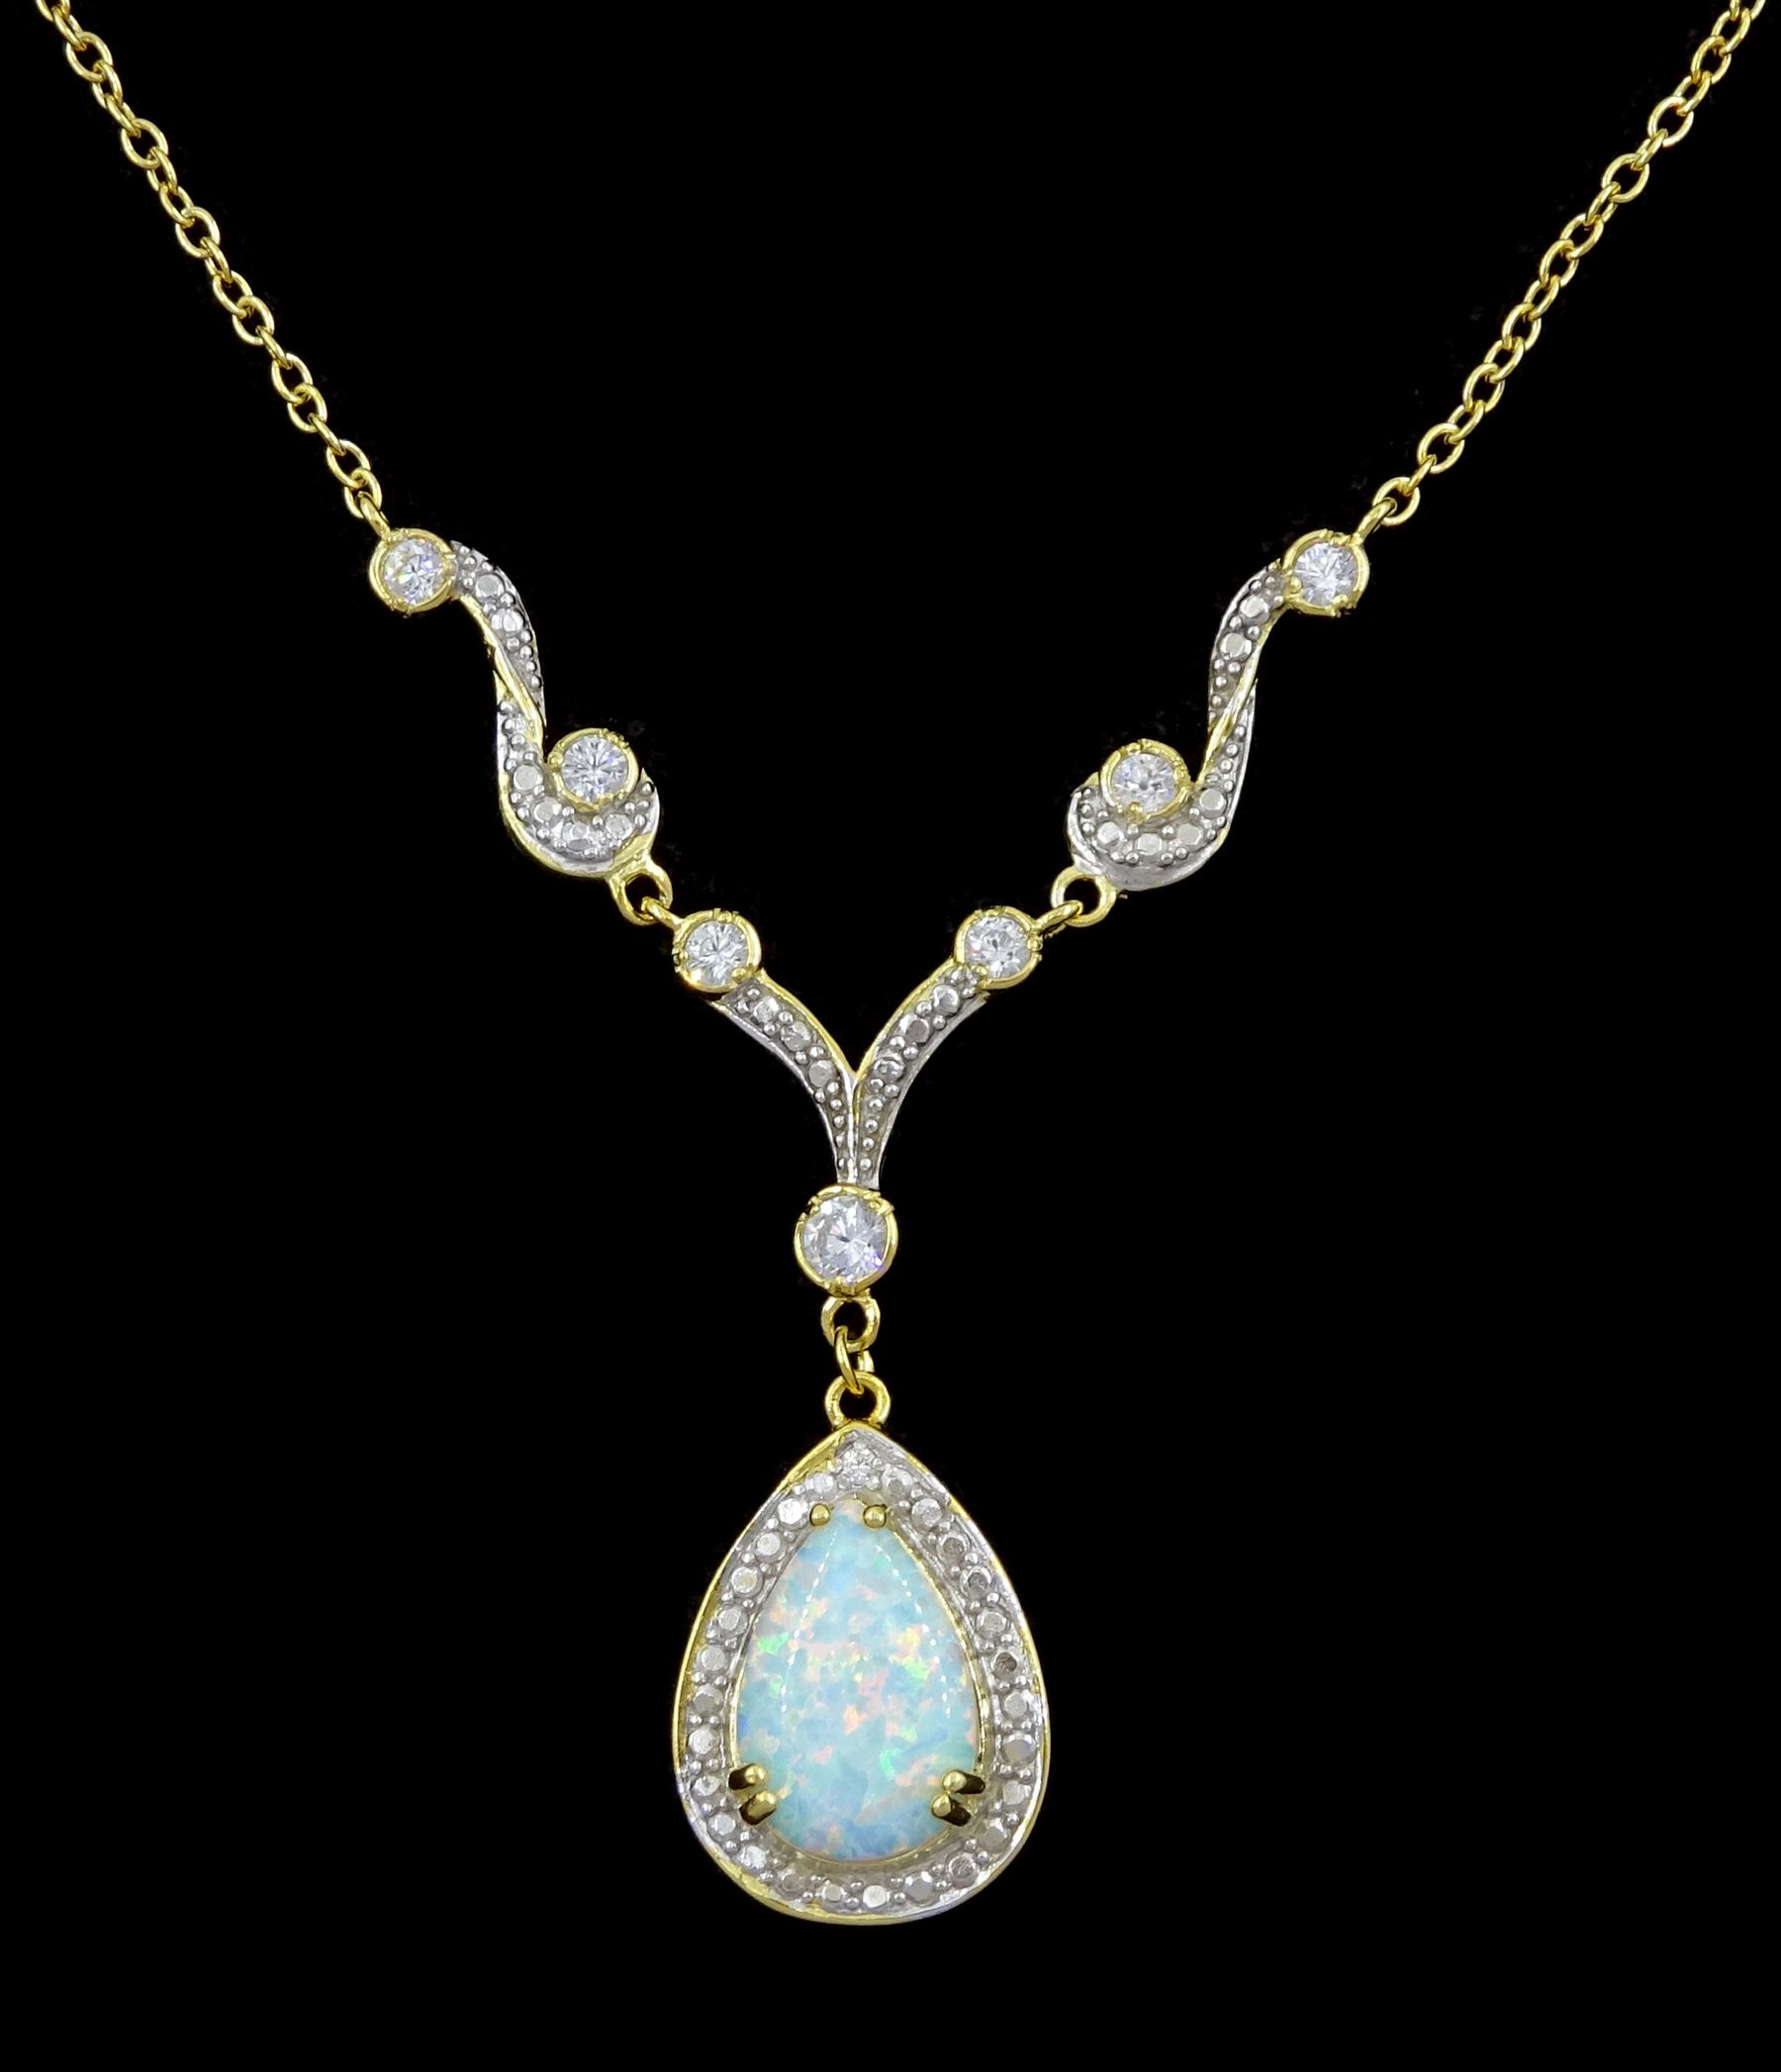 Silver-gilt opal and cubic zirconia pendant necklace